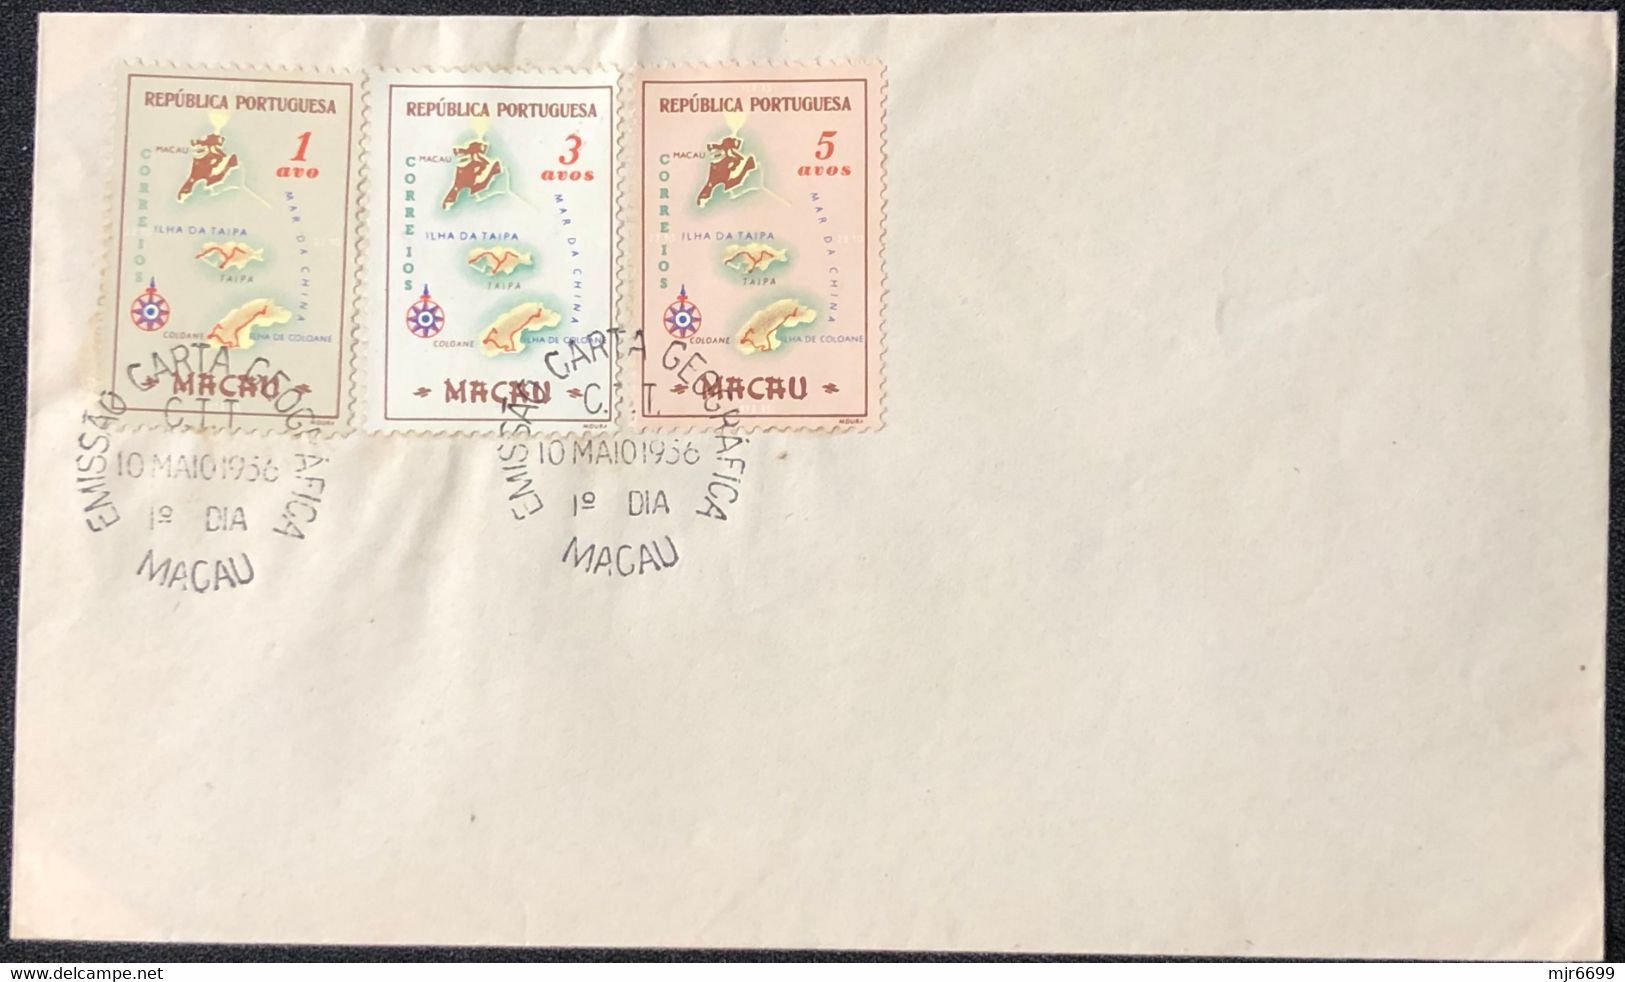 1956 GEOGRAPHIC CHART OF MACAU FDC X 4 COVERS ALL DIFFERENT - CAT. 85 EUROSOR COMPLETE SET. - Storia Postale